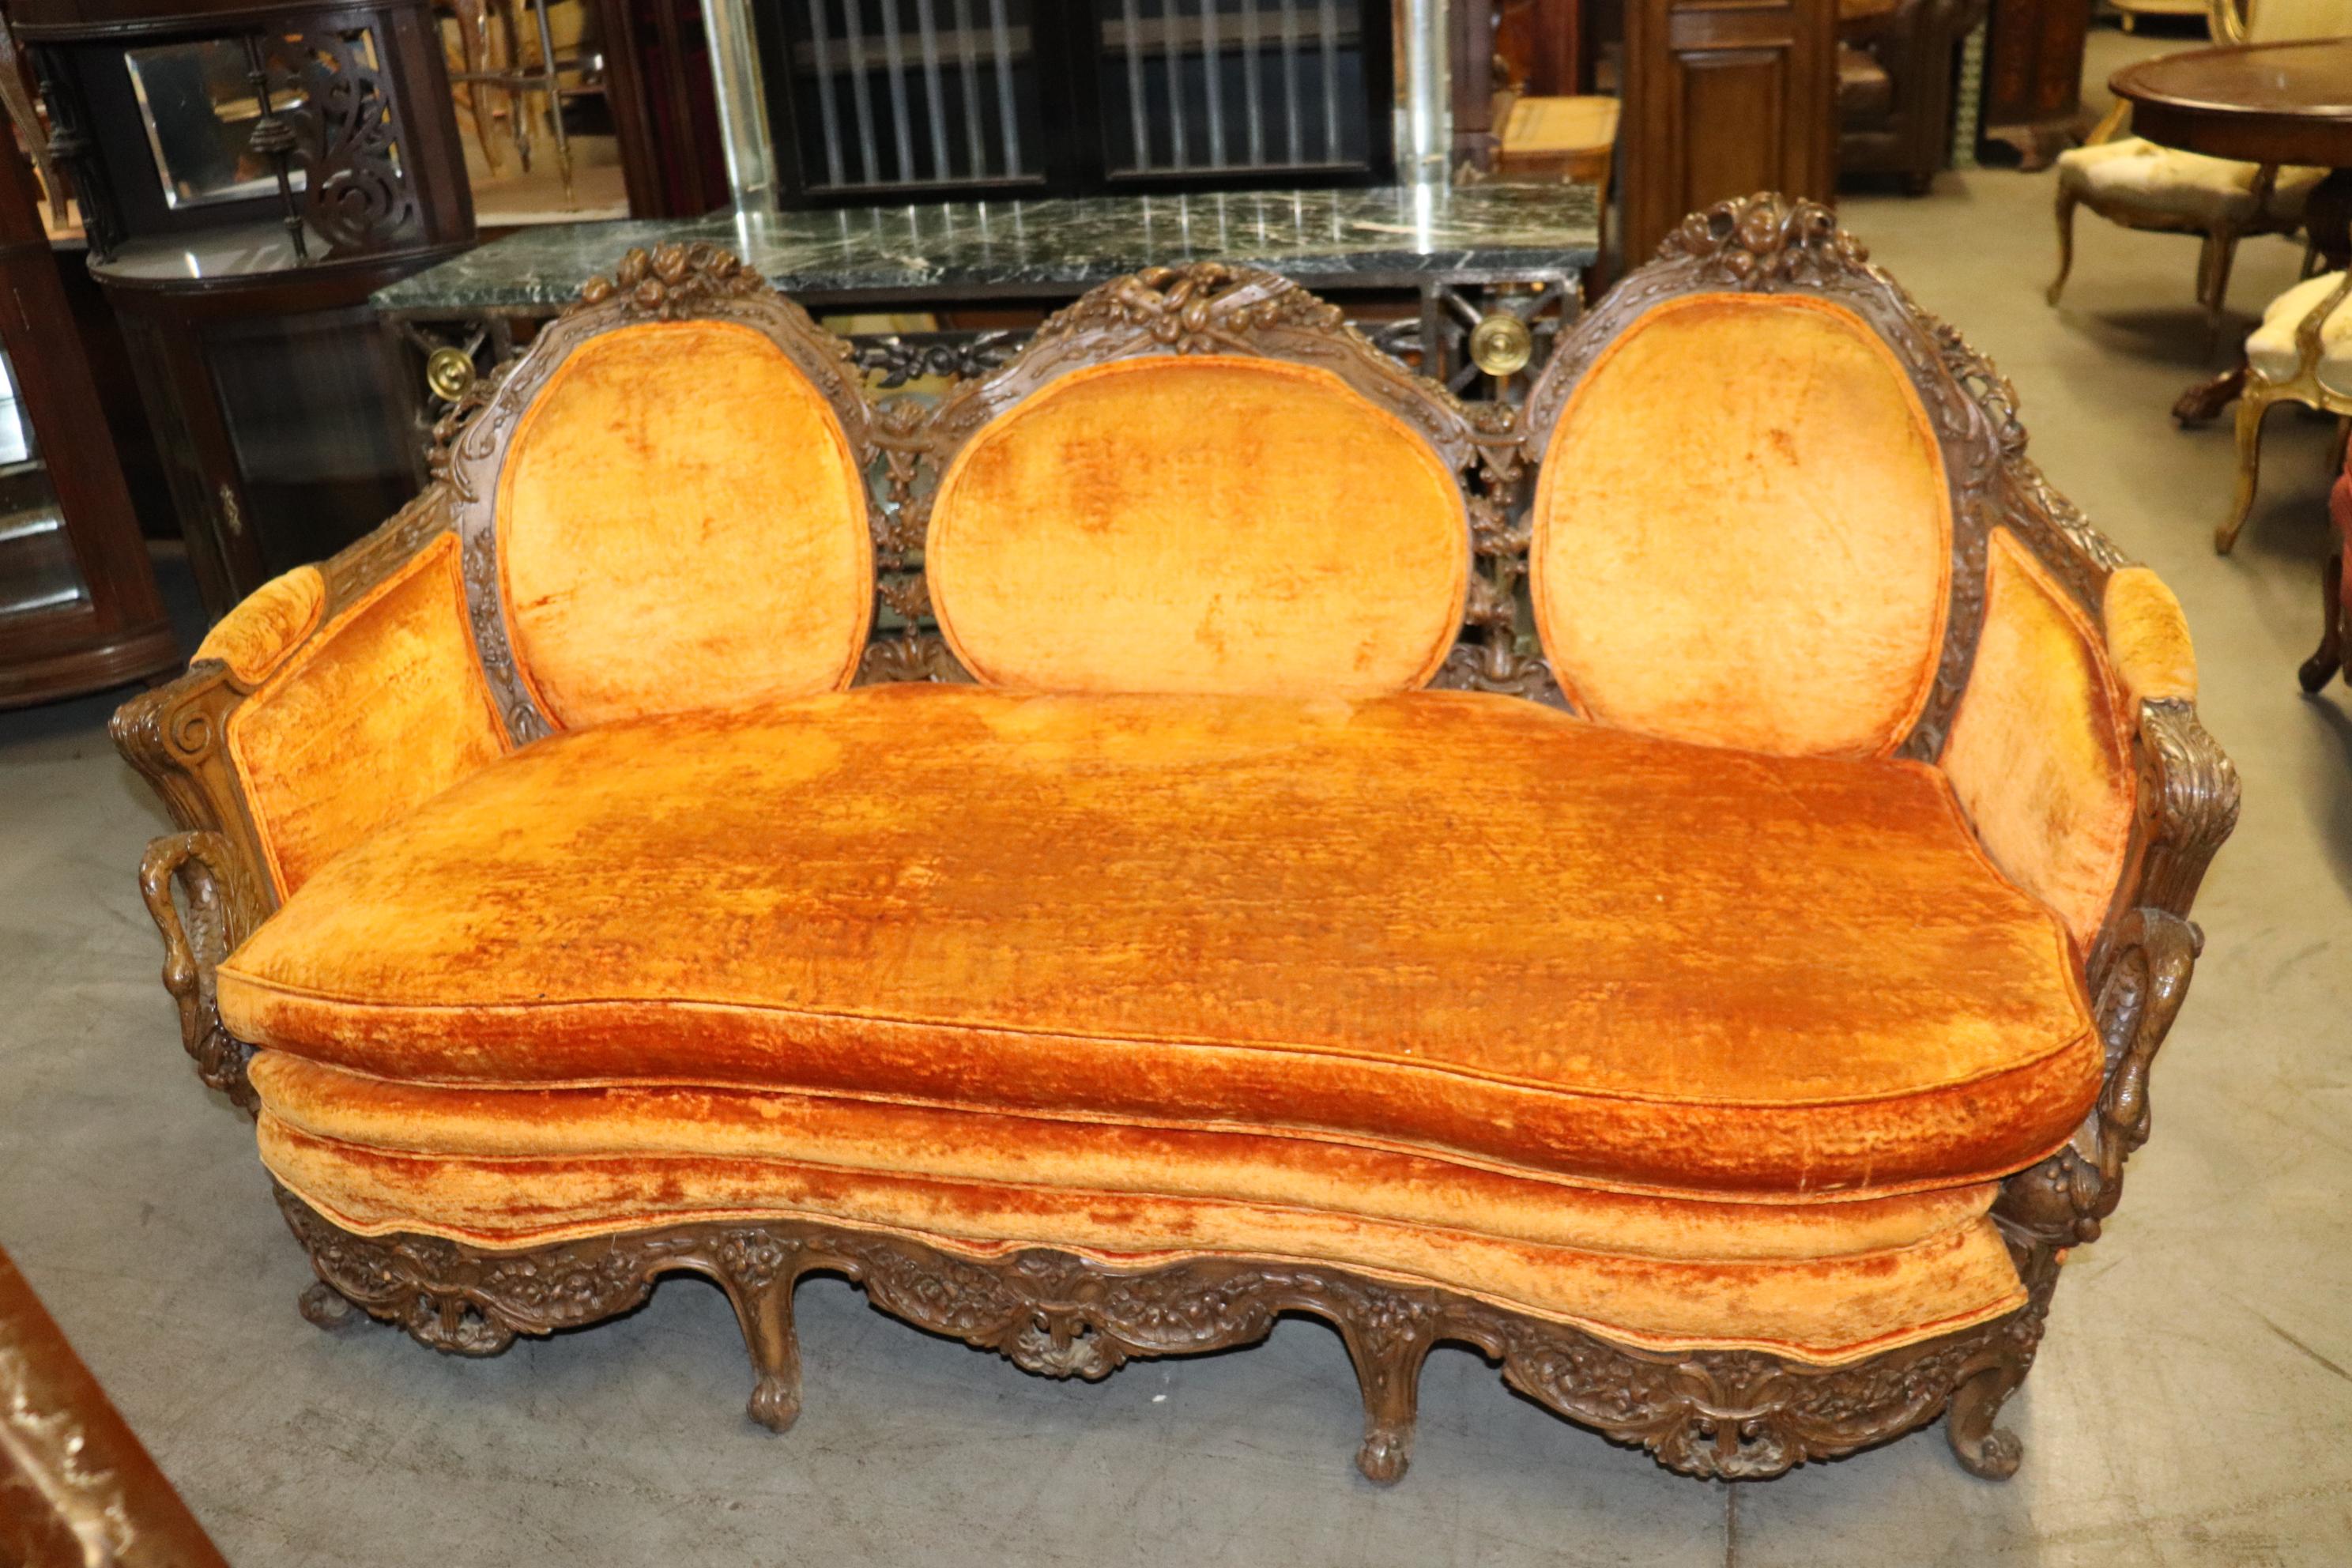 This is a gorgeous and unique swan carved French Louis XV sofa with its good clean original orange velvet upholstery. The carving is very nice and the swans add a touch of charm and class. The sofa measures 74 inches wide x 37 tall x 37 deep and the